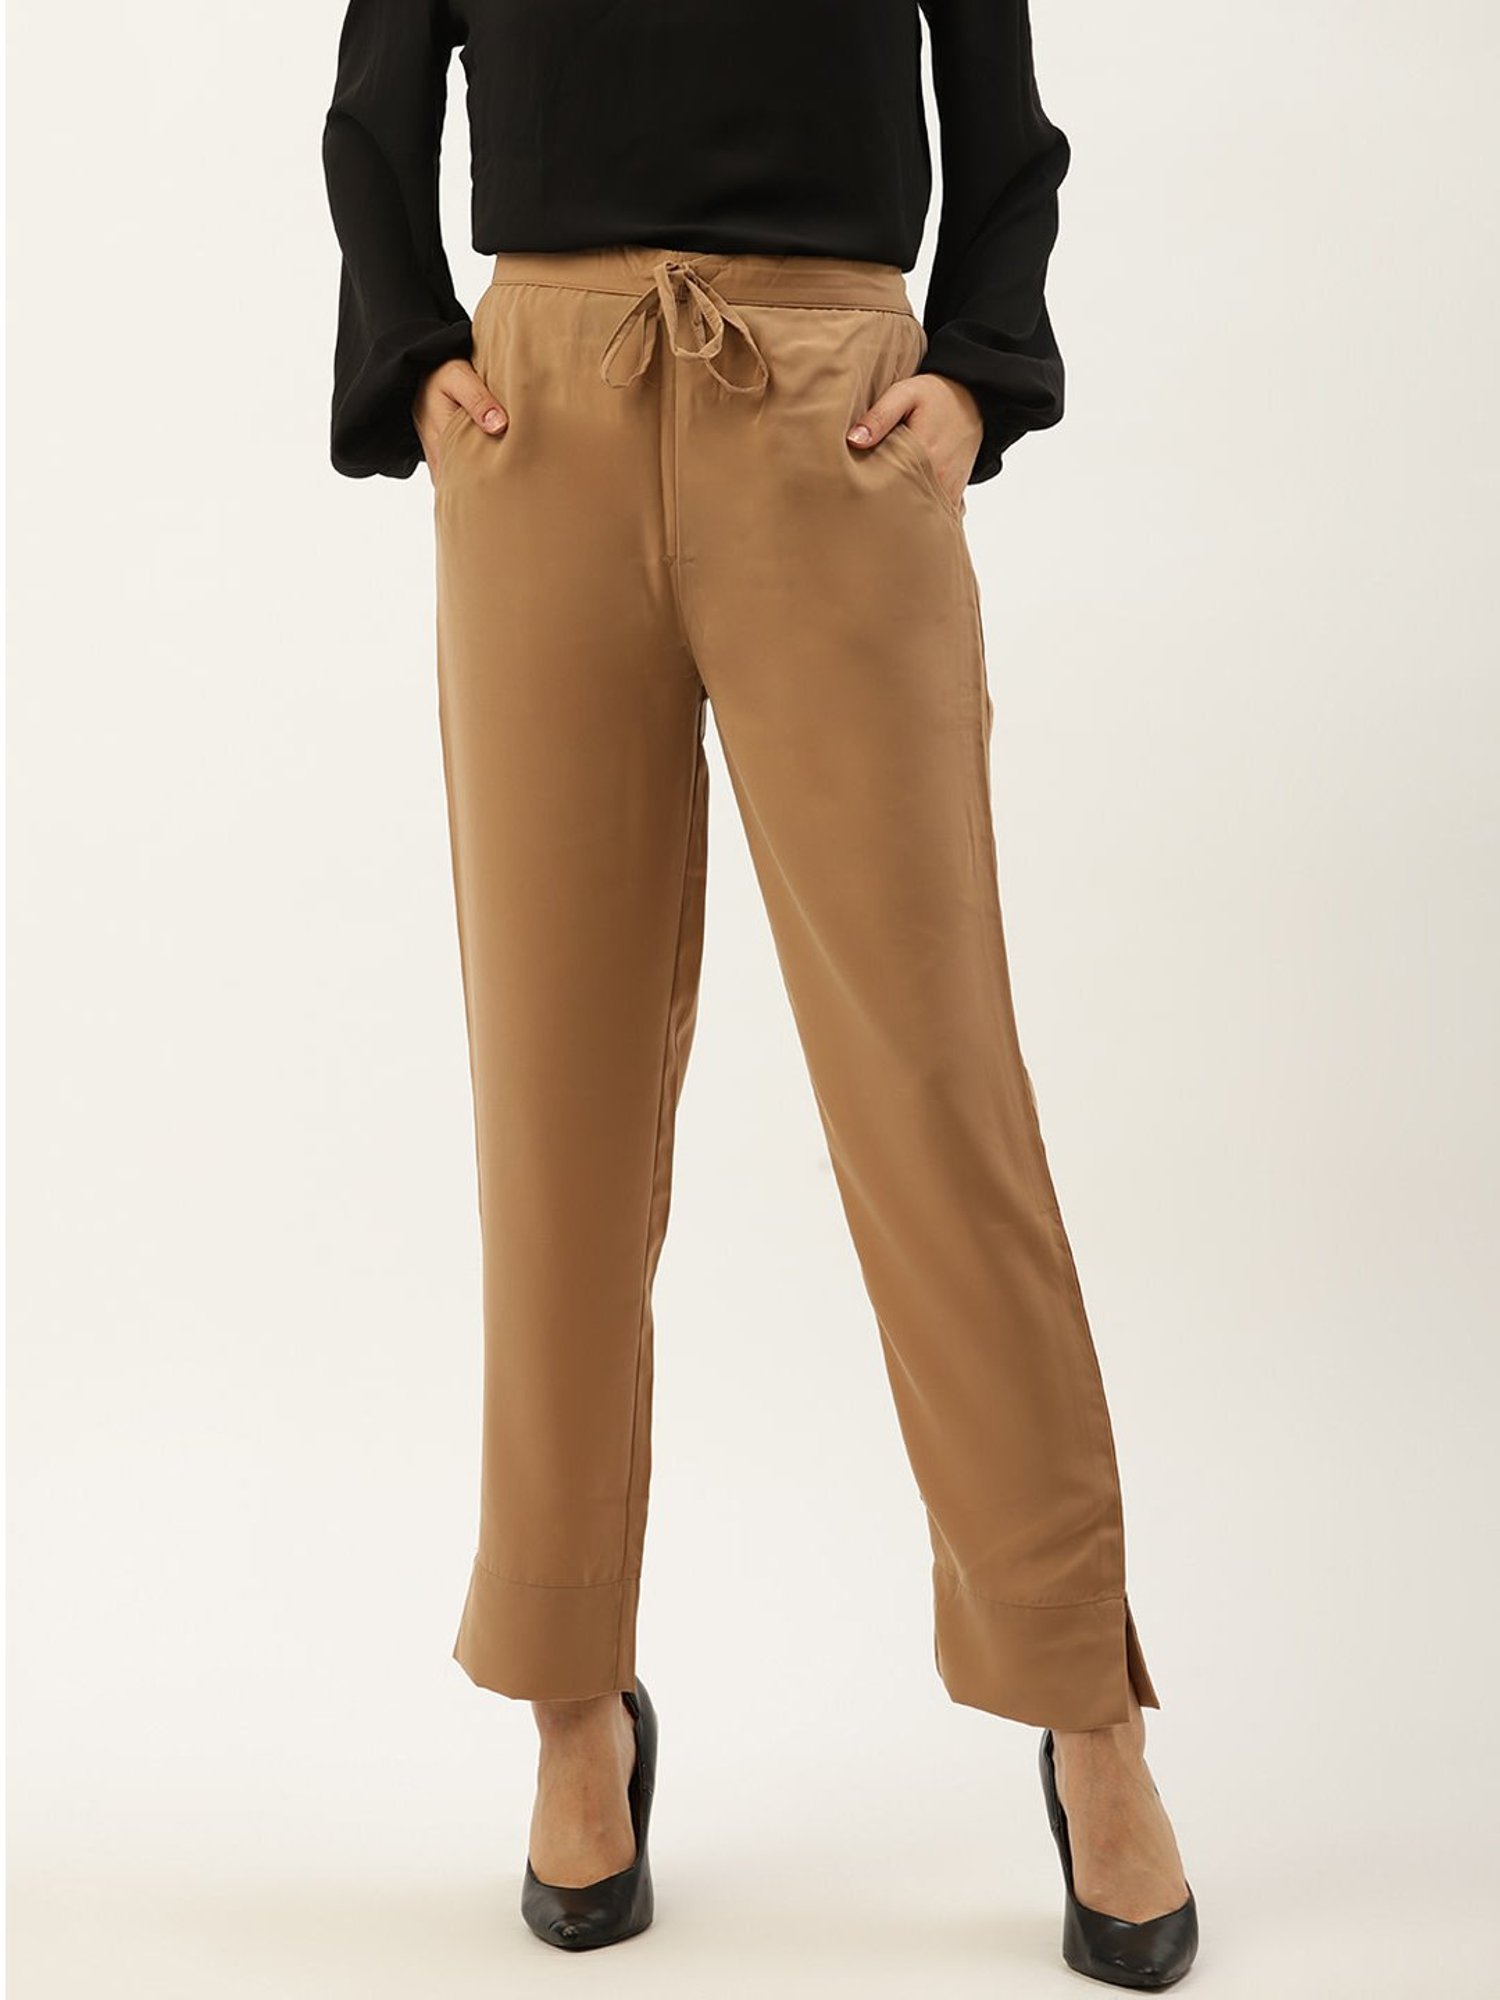 Wideleg trousers tan beige and neutral shade pairs to wear now